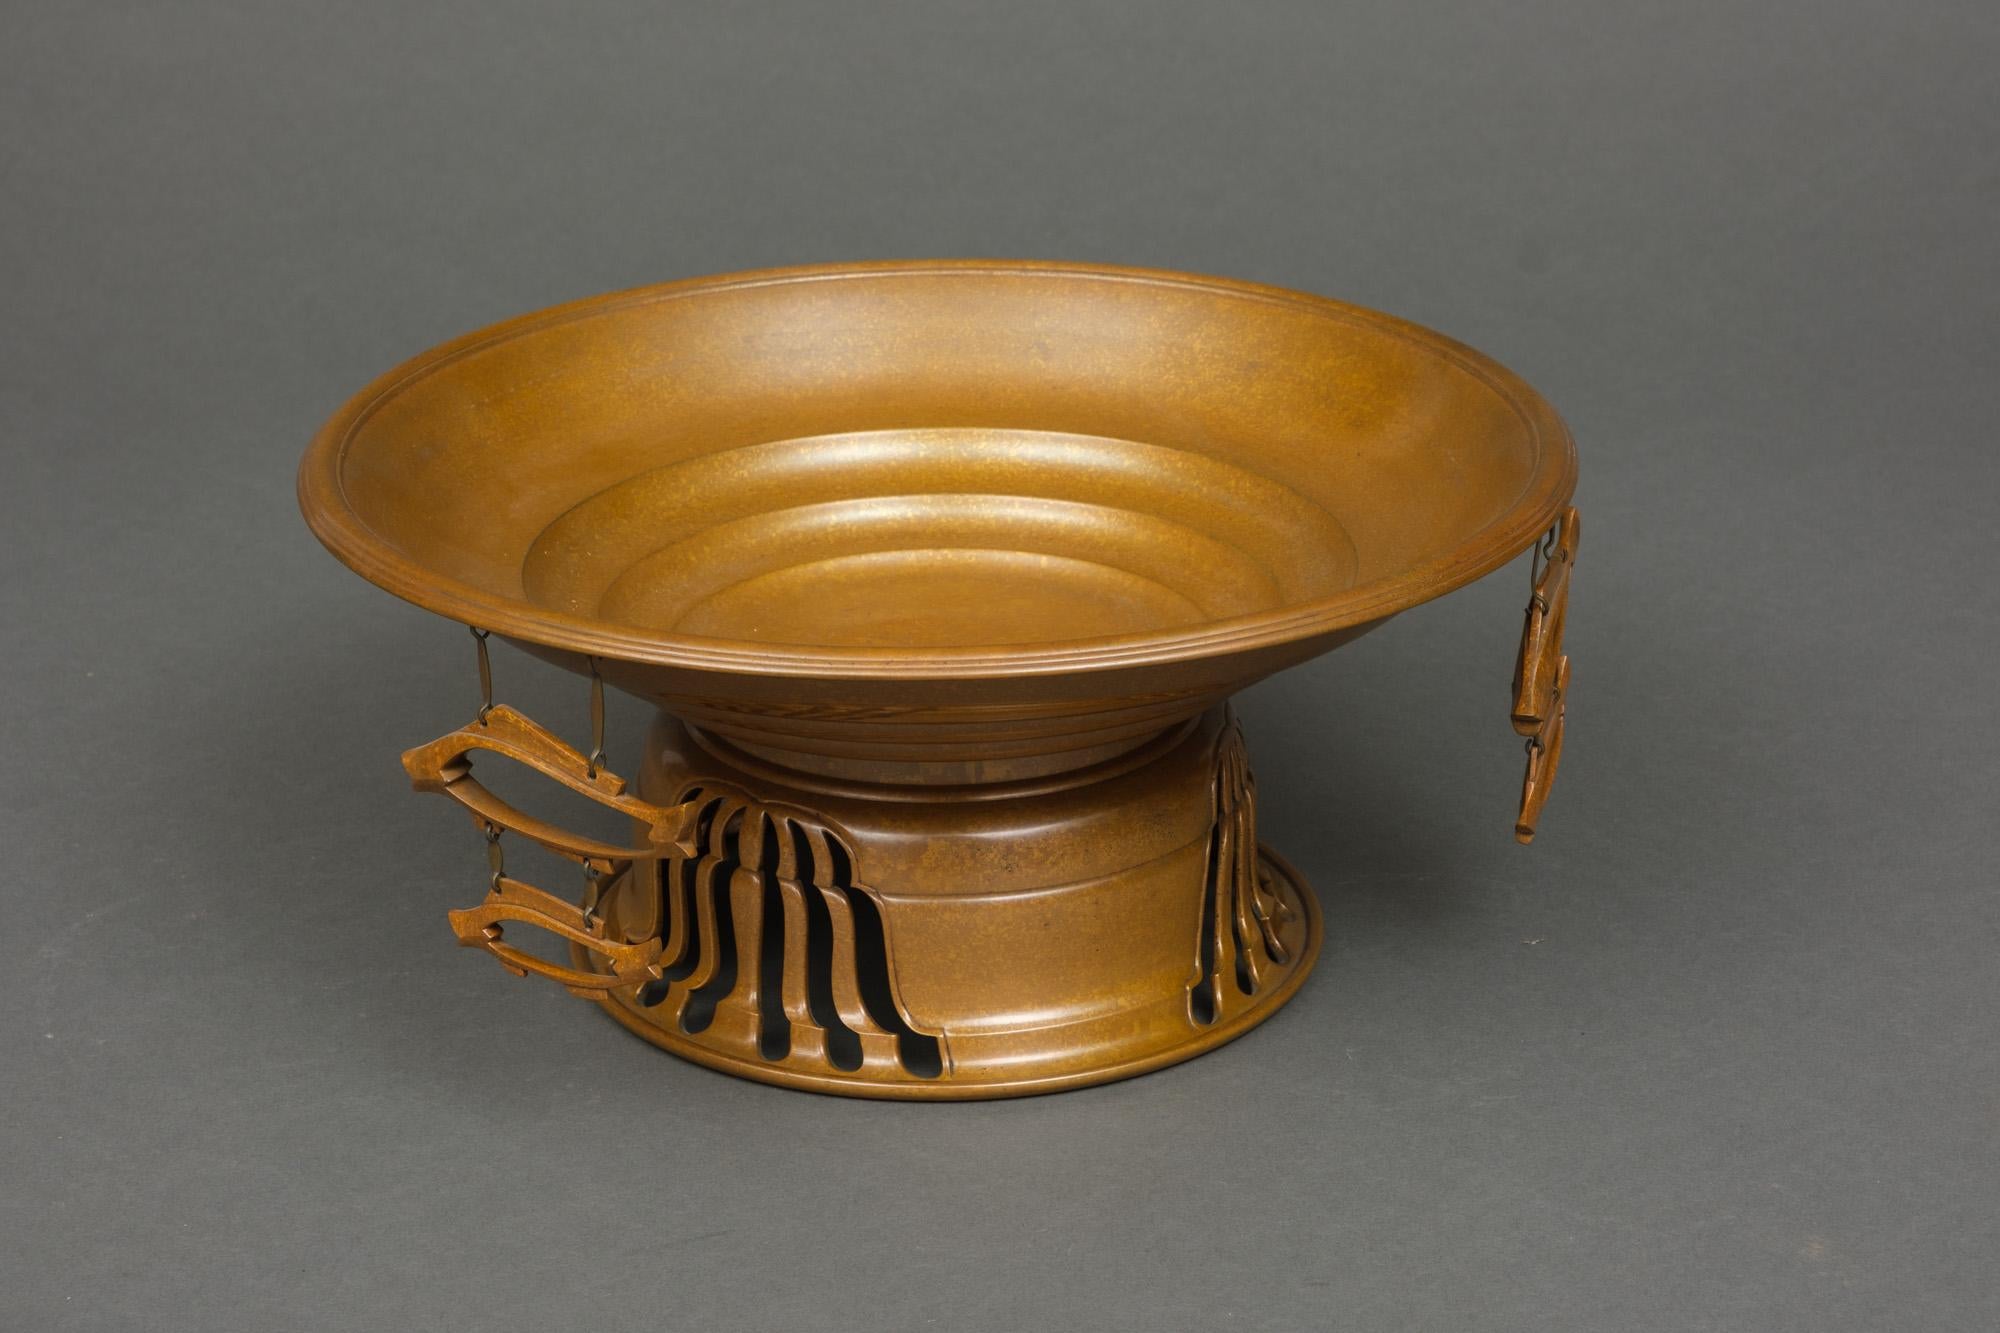 Bronze Large Japanese patinated bronze footed water basin (suiban) by Studio Heiwa 平和堂